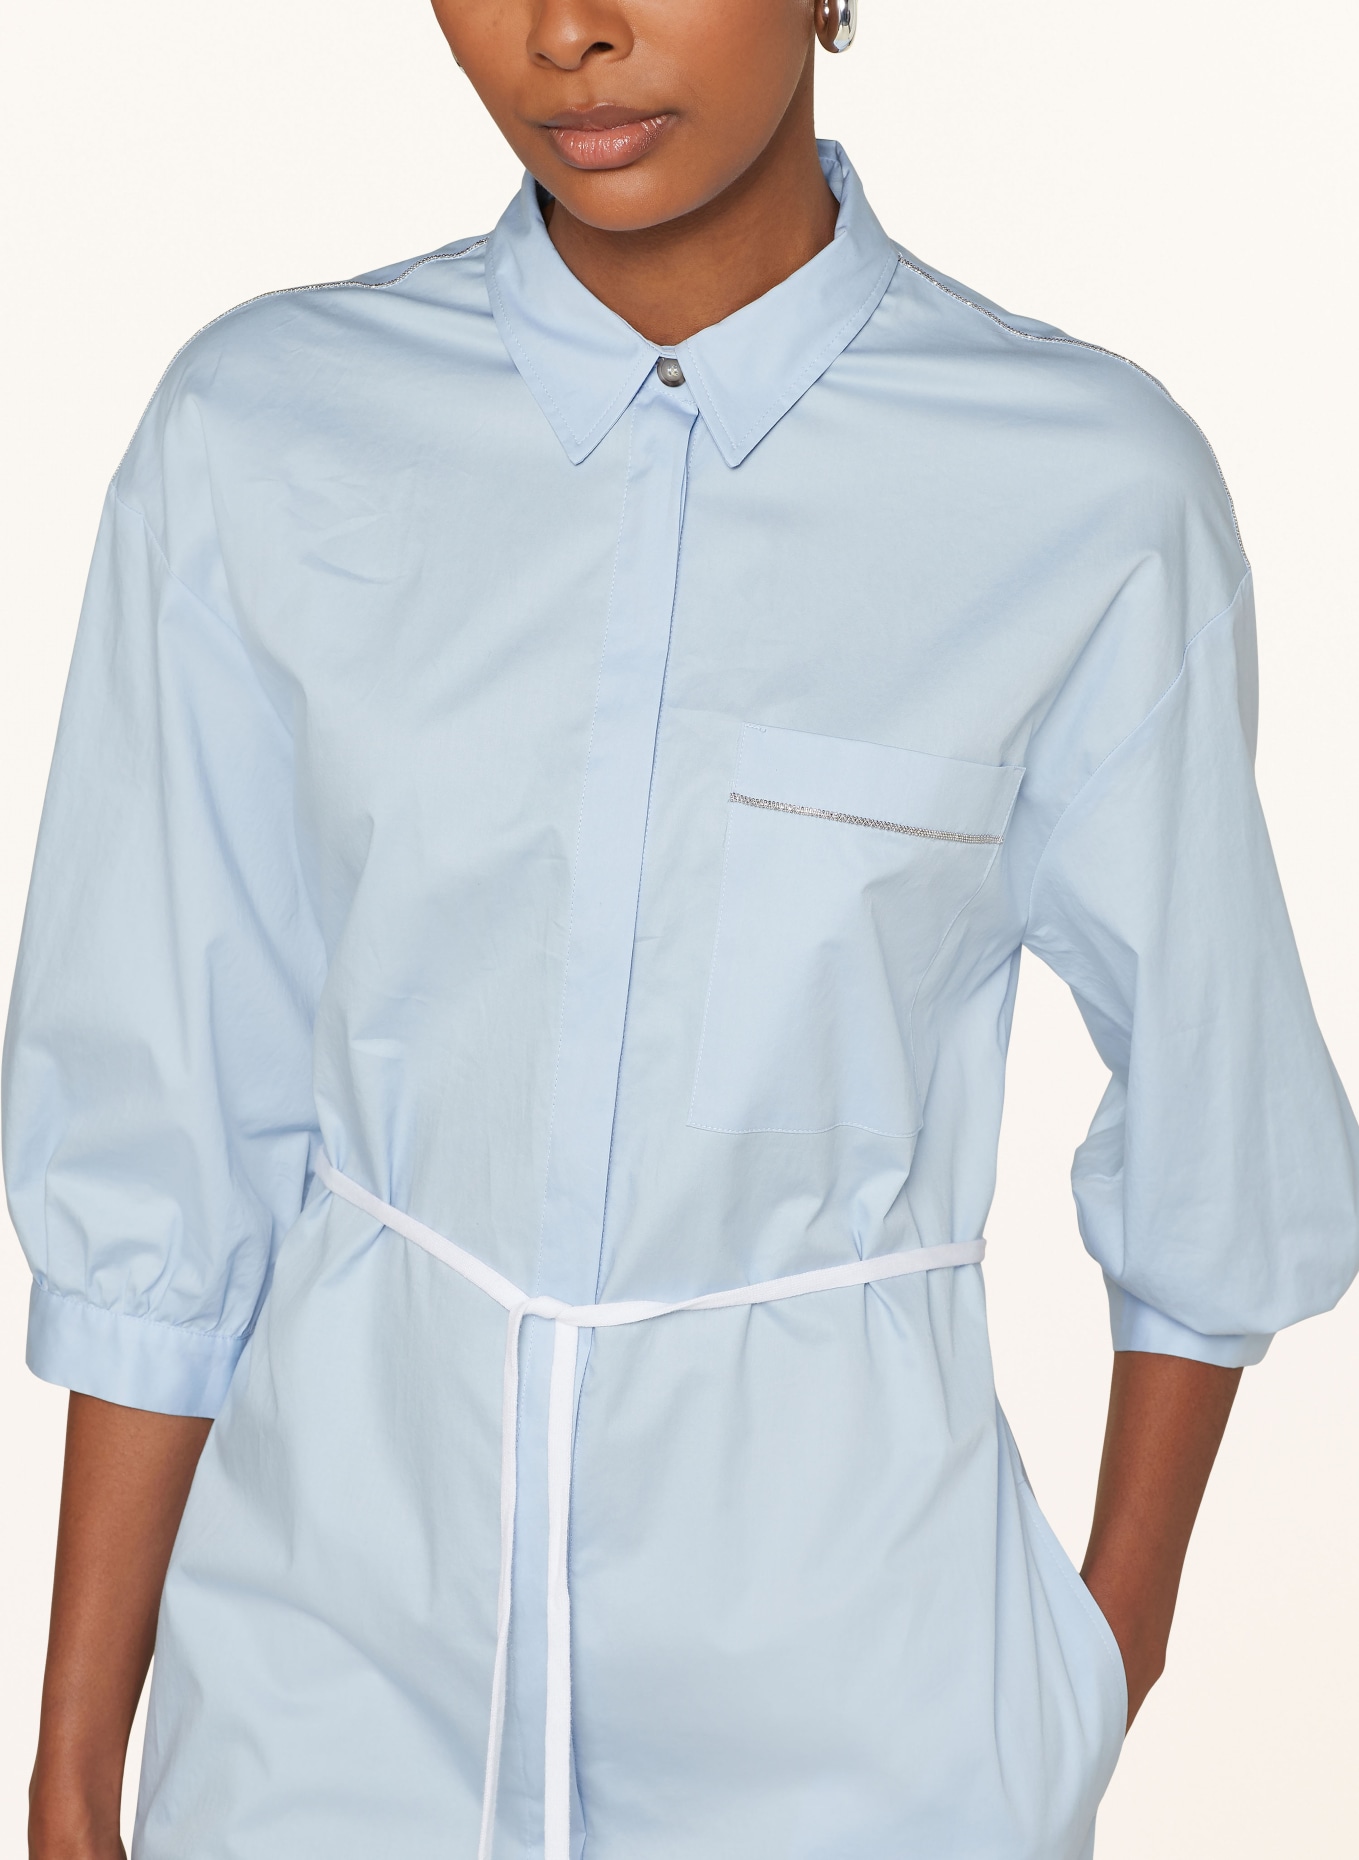 PESERICO Shirt dress with 3/4 sleeves, Color: LIGHT BLUE (Image 4)